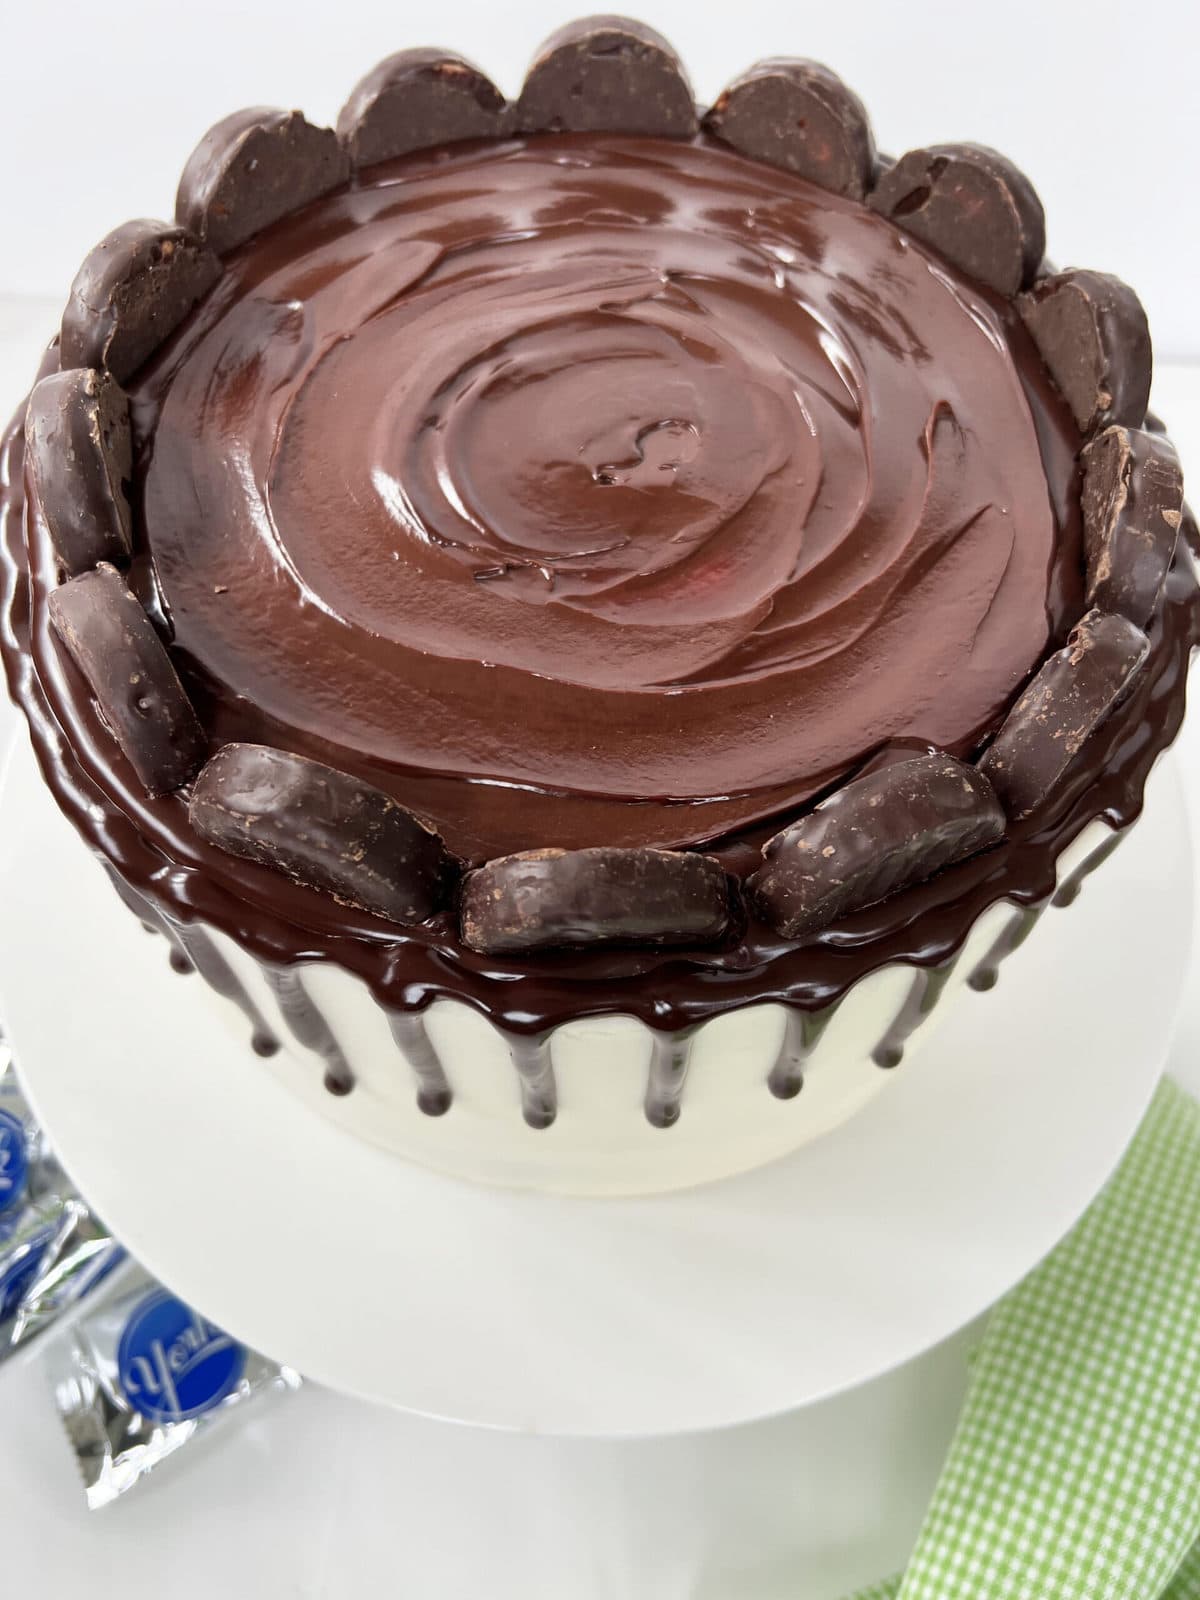 Delicious Peppermint Patty Cake